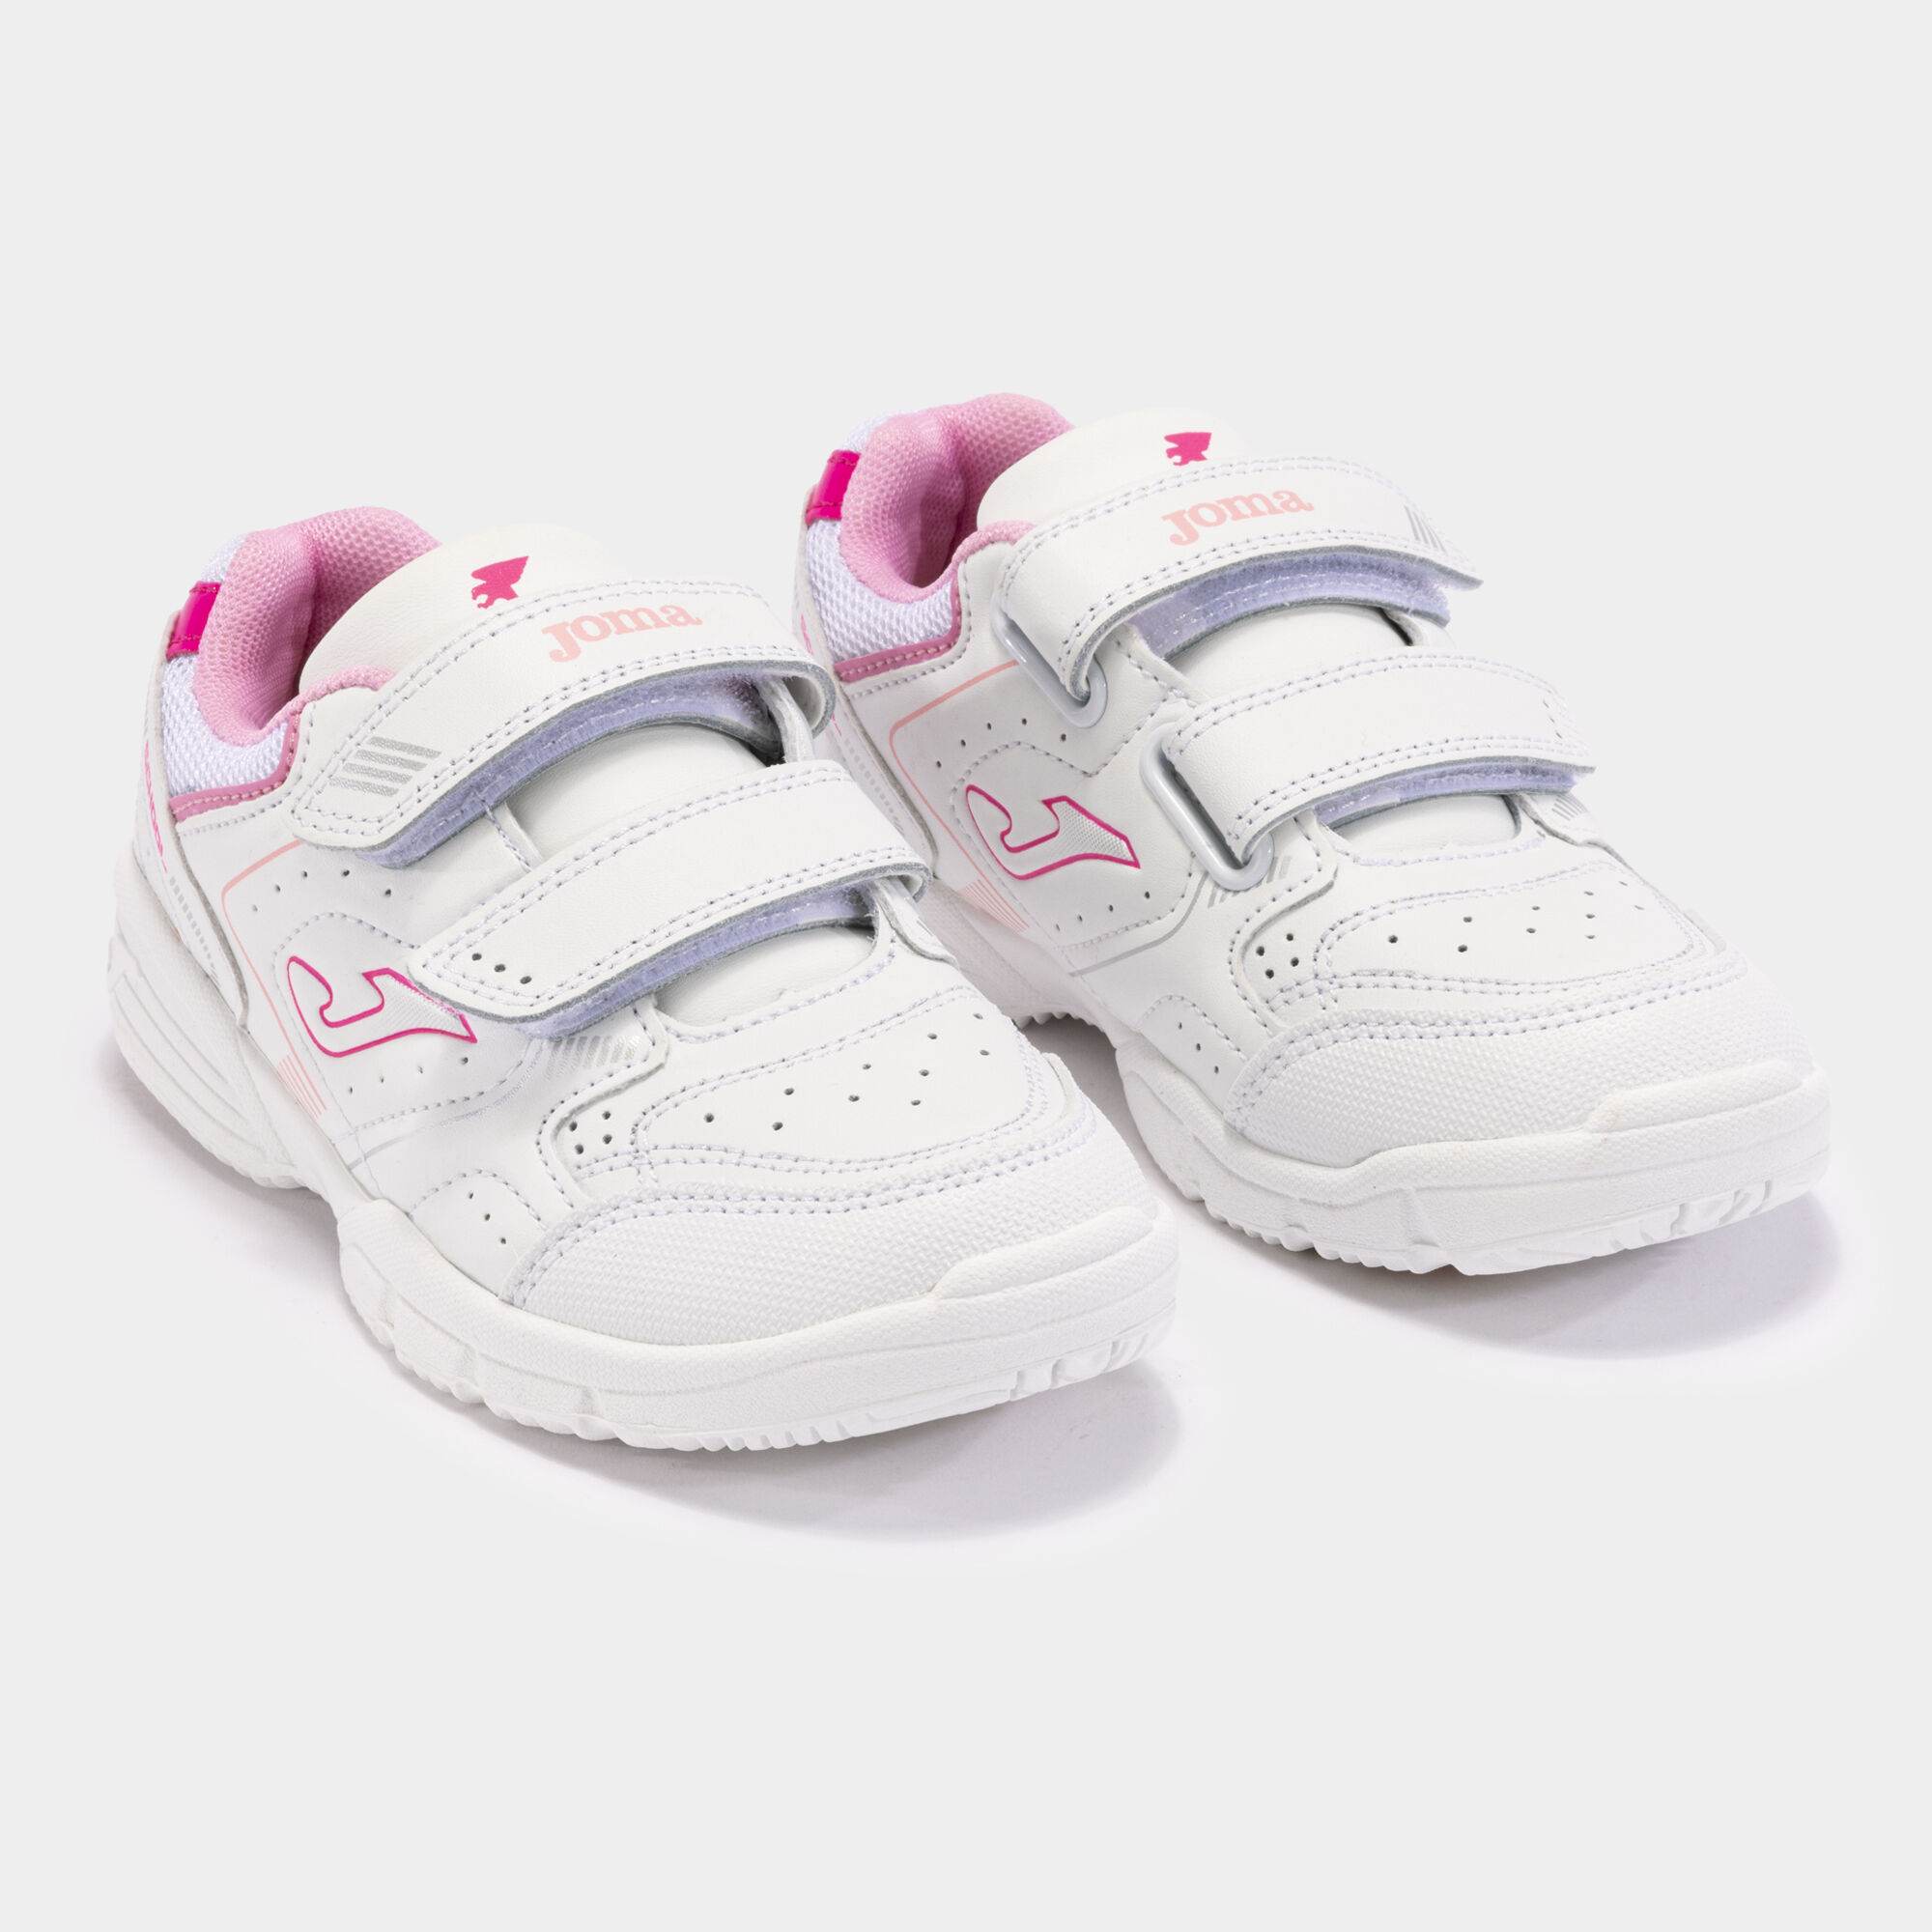 Casual shoes W.School Jr 24 junior white pink